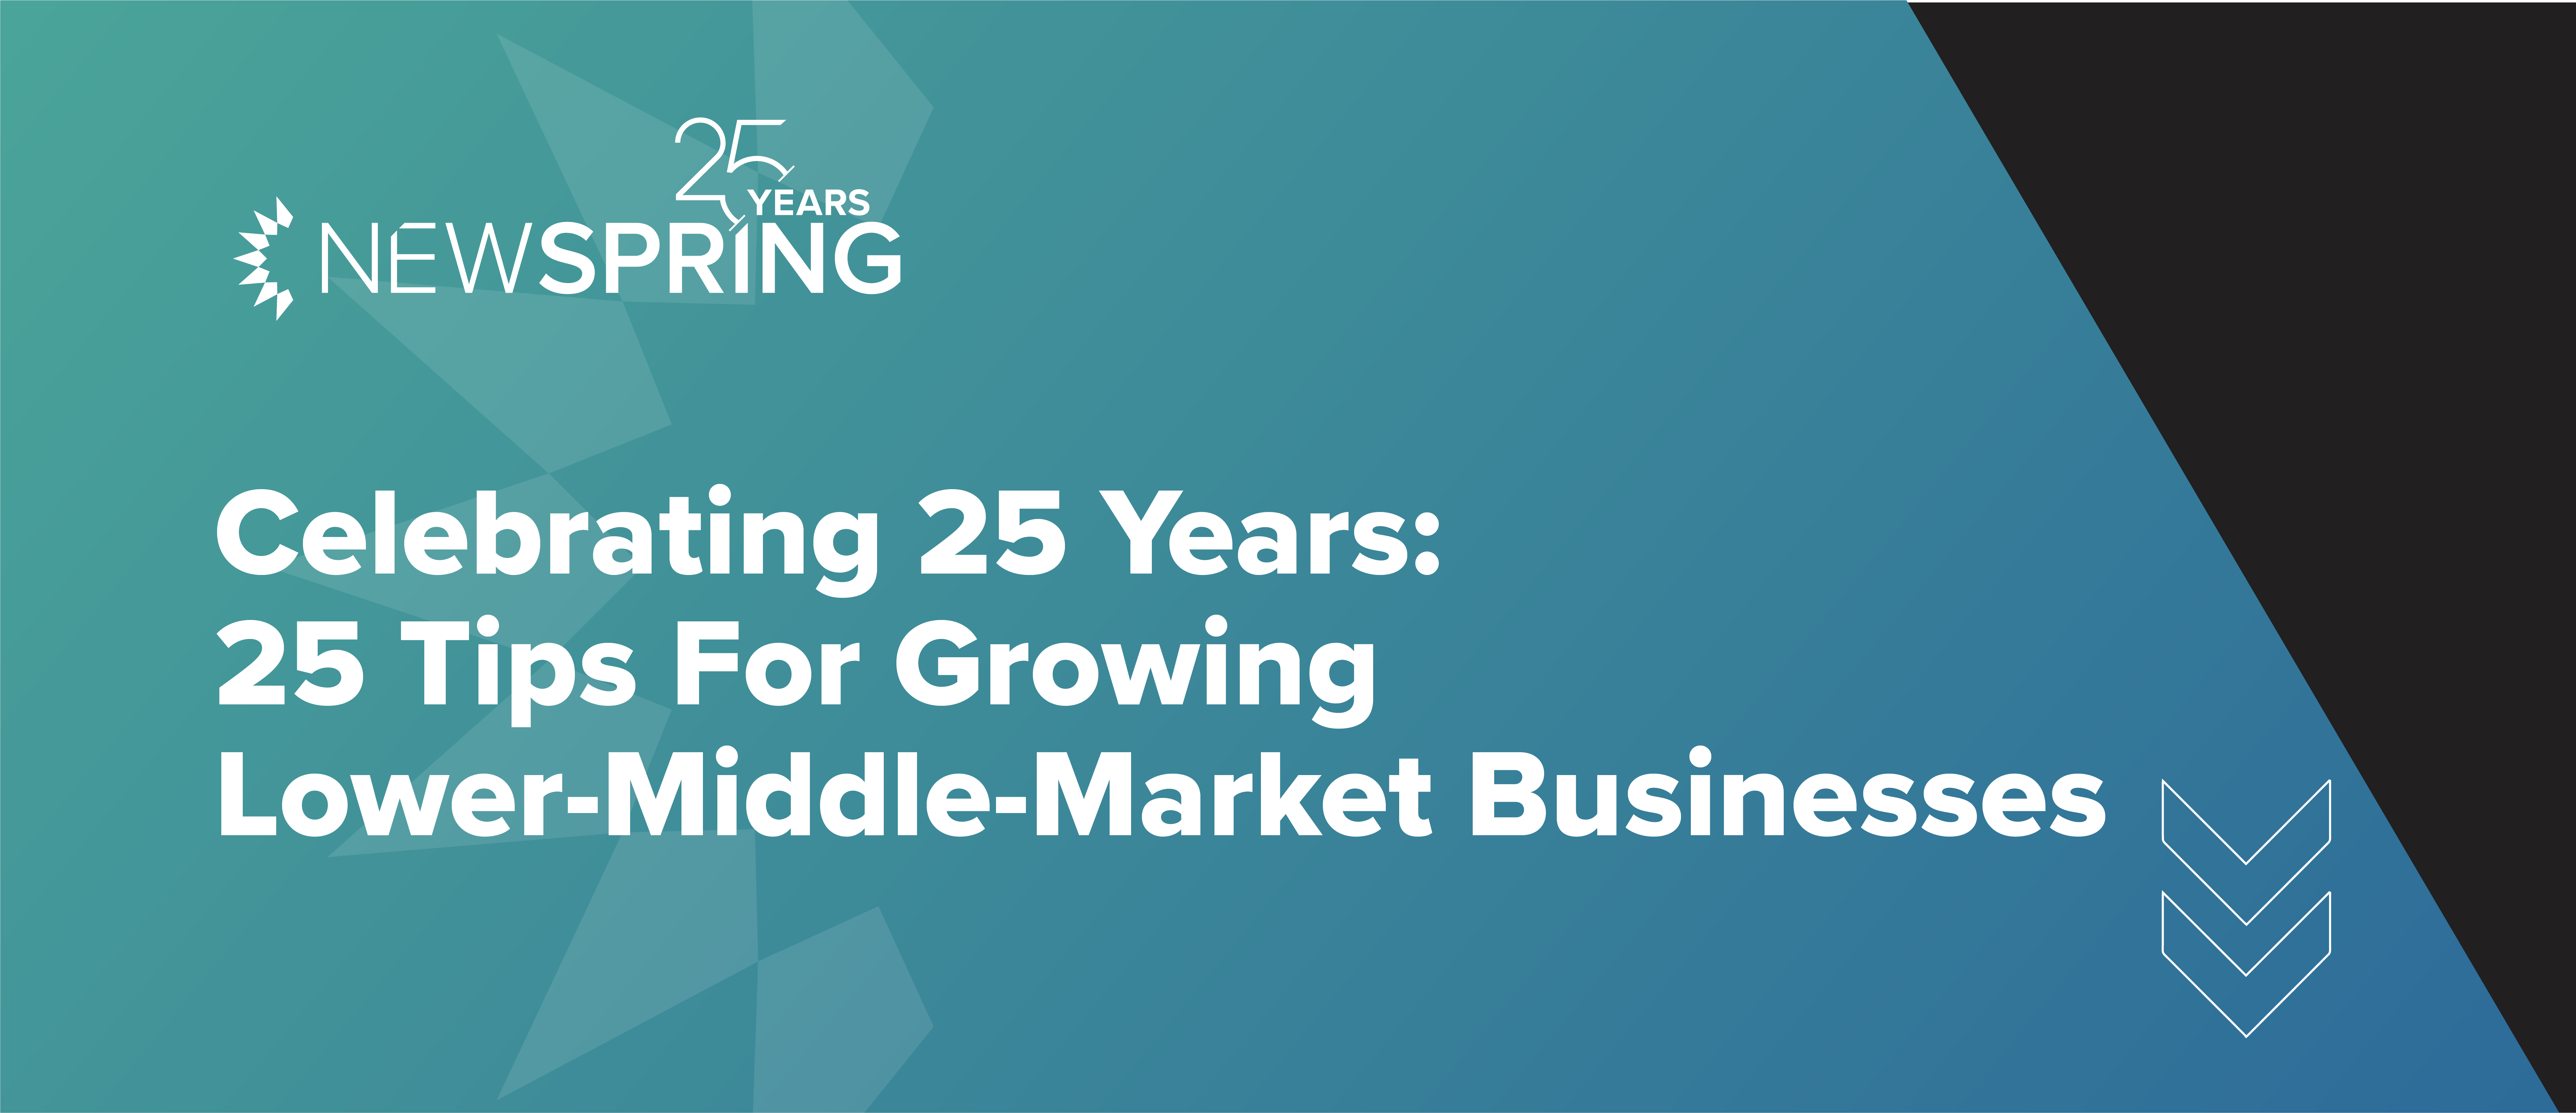 Celebrating 25 Years: 25 Tips for Growing Lower-Middle-Market Businesses